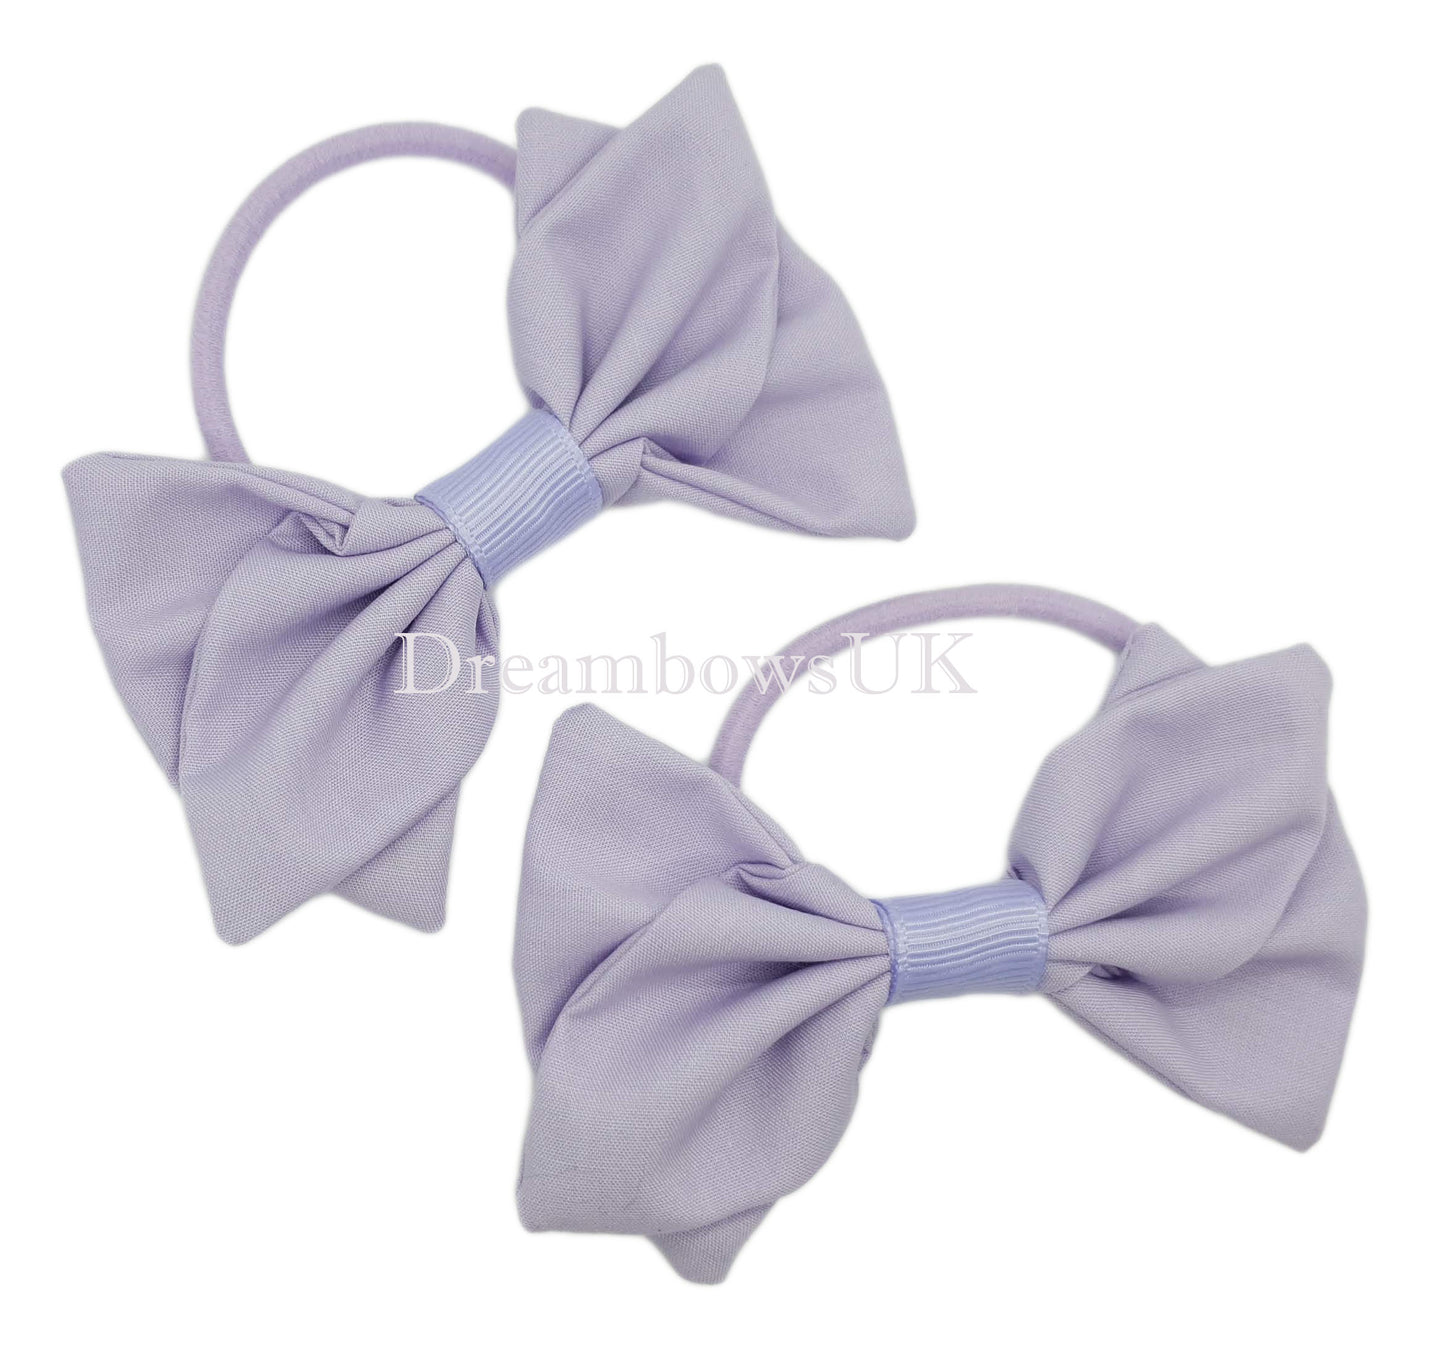 Lilac fabric hair bows for girls on thick hair ties